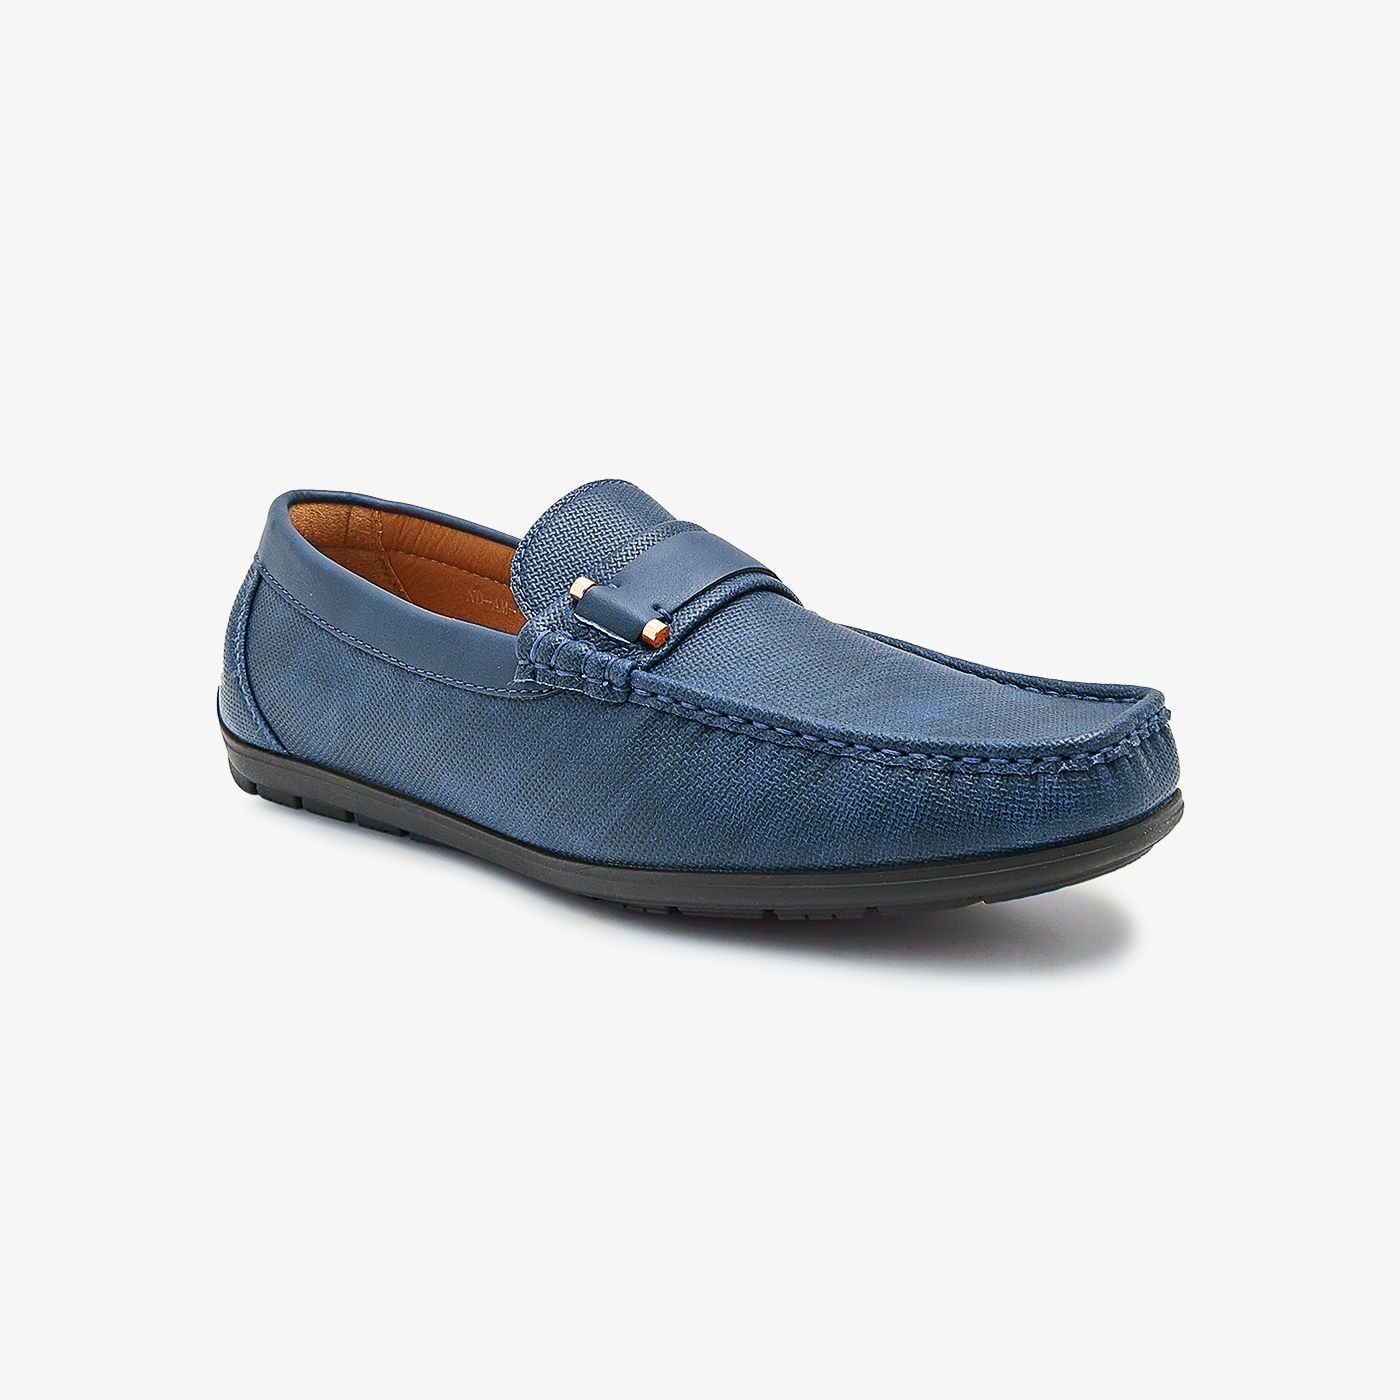 Trimmed Mens Loafers